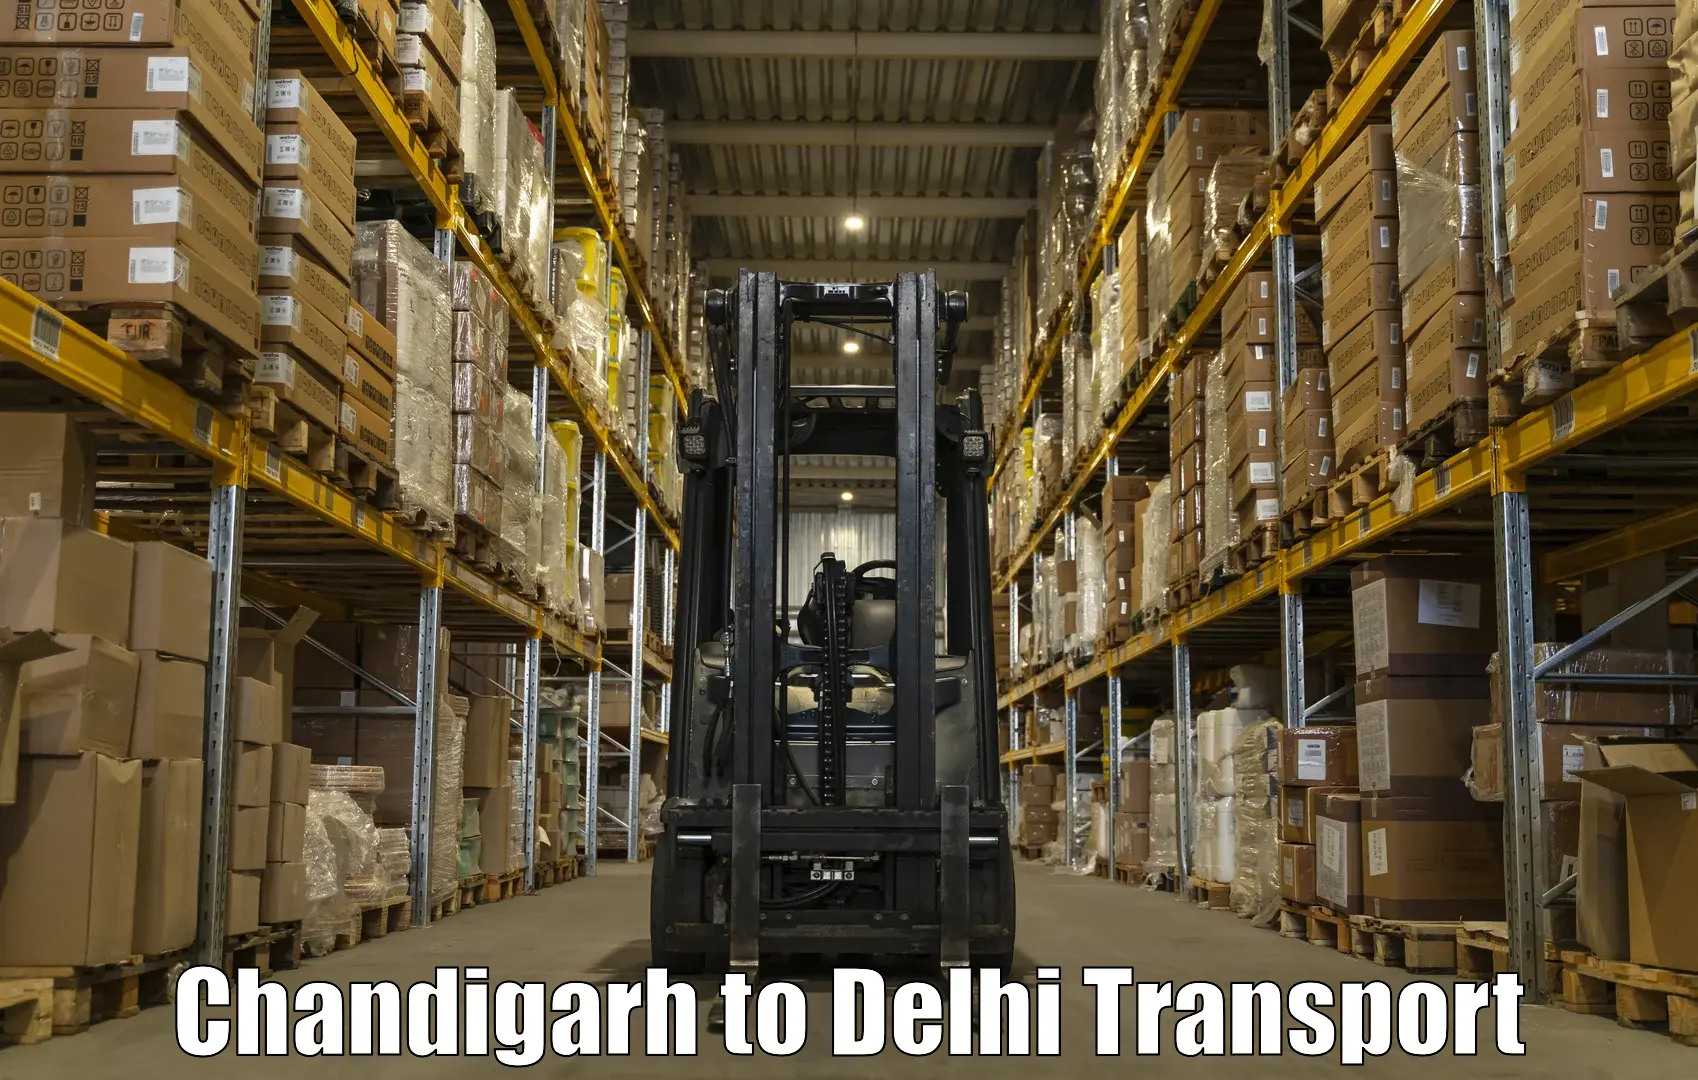 Daily transport service Chandigarh to NCR